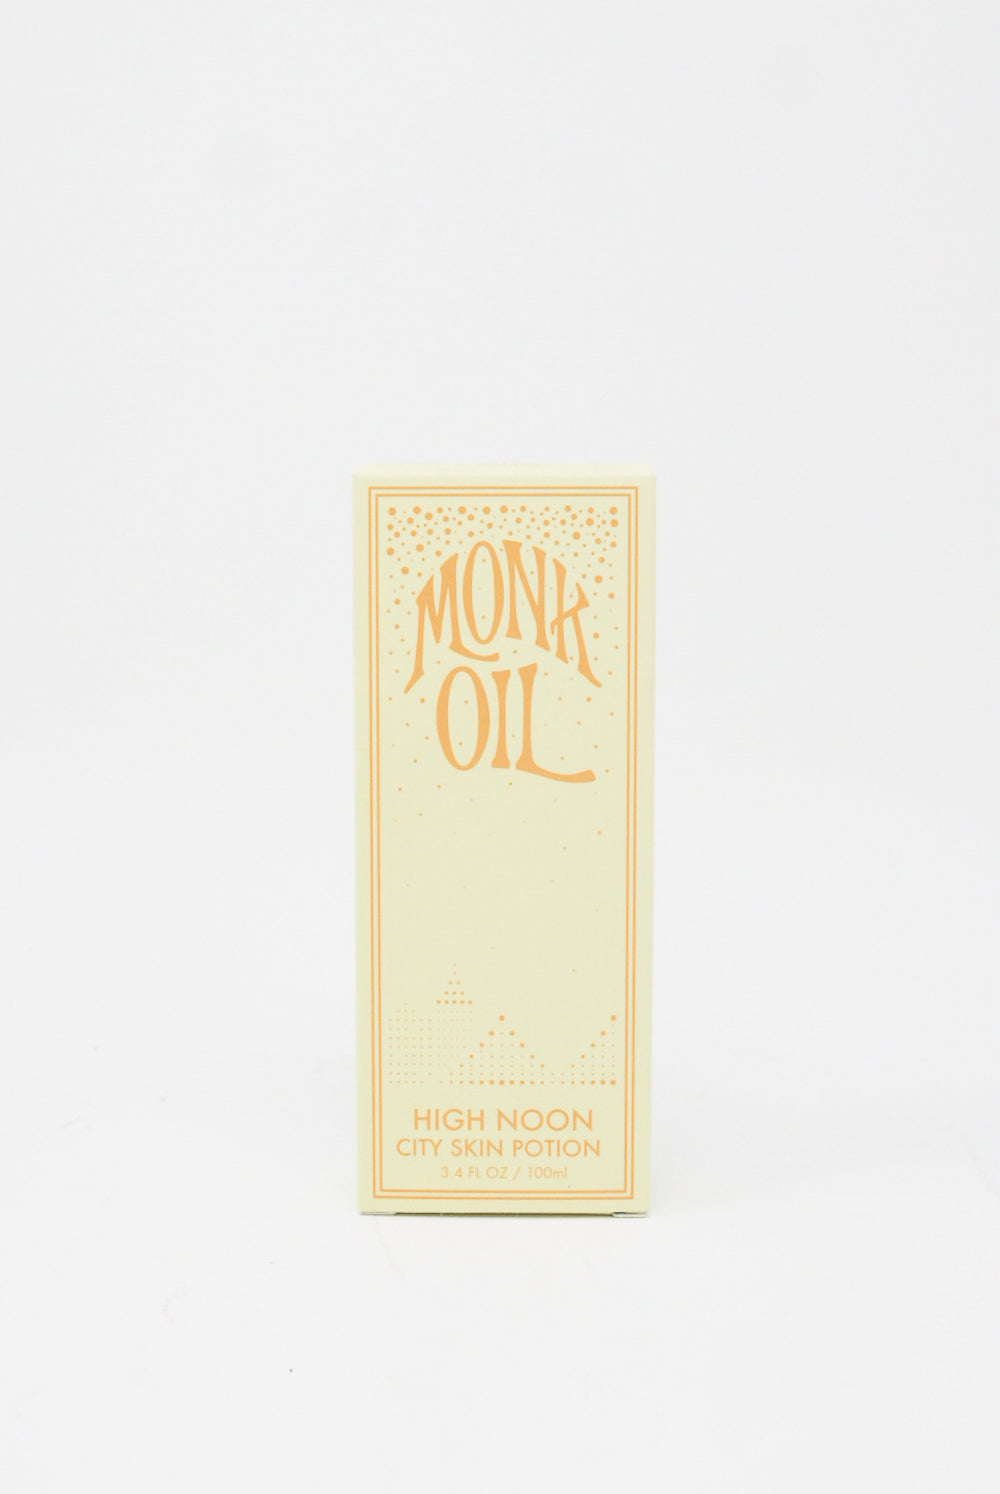 Monk Oil - Skin Potion in High Noon